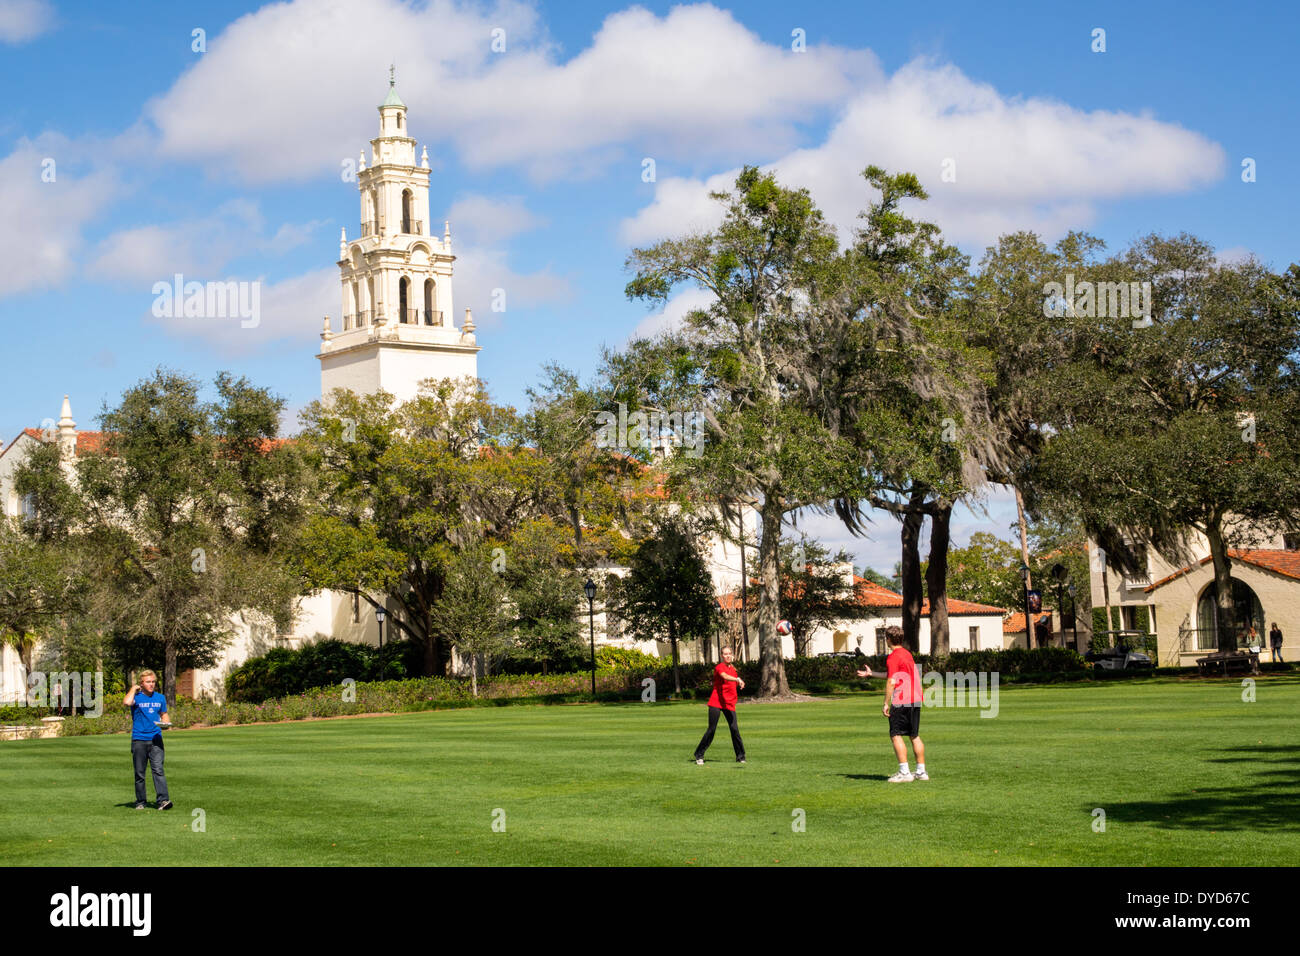 Winter Park Florida,Rollins College,campus,school,Knowles Memorial Chapel,lawn,student students throwing,ball,teen teens teenager teenagers boy boys,m Stock Photo